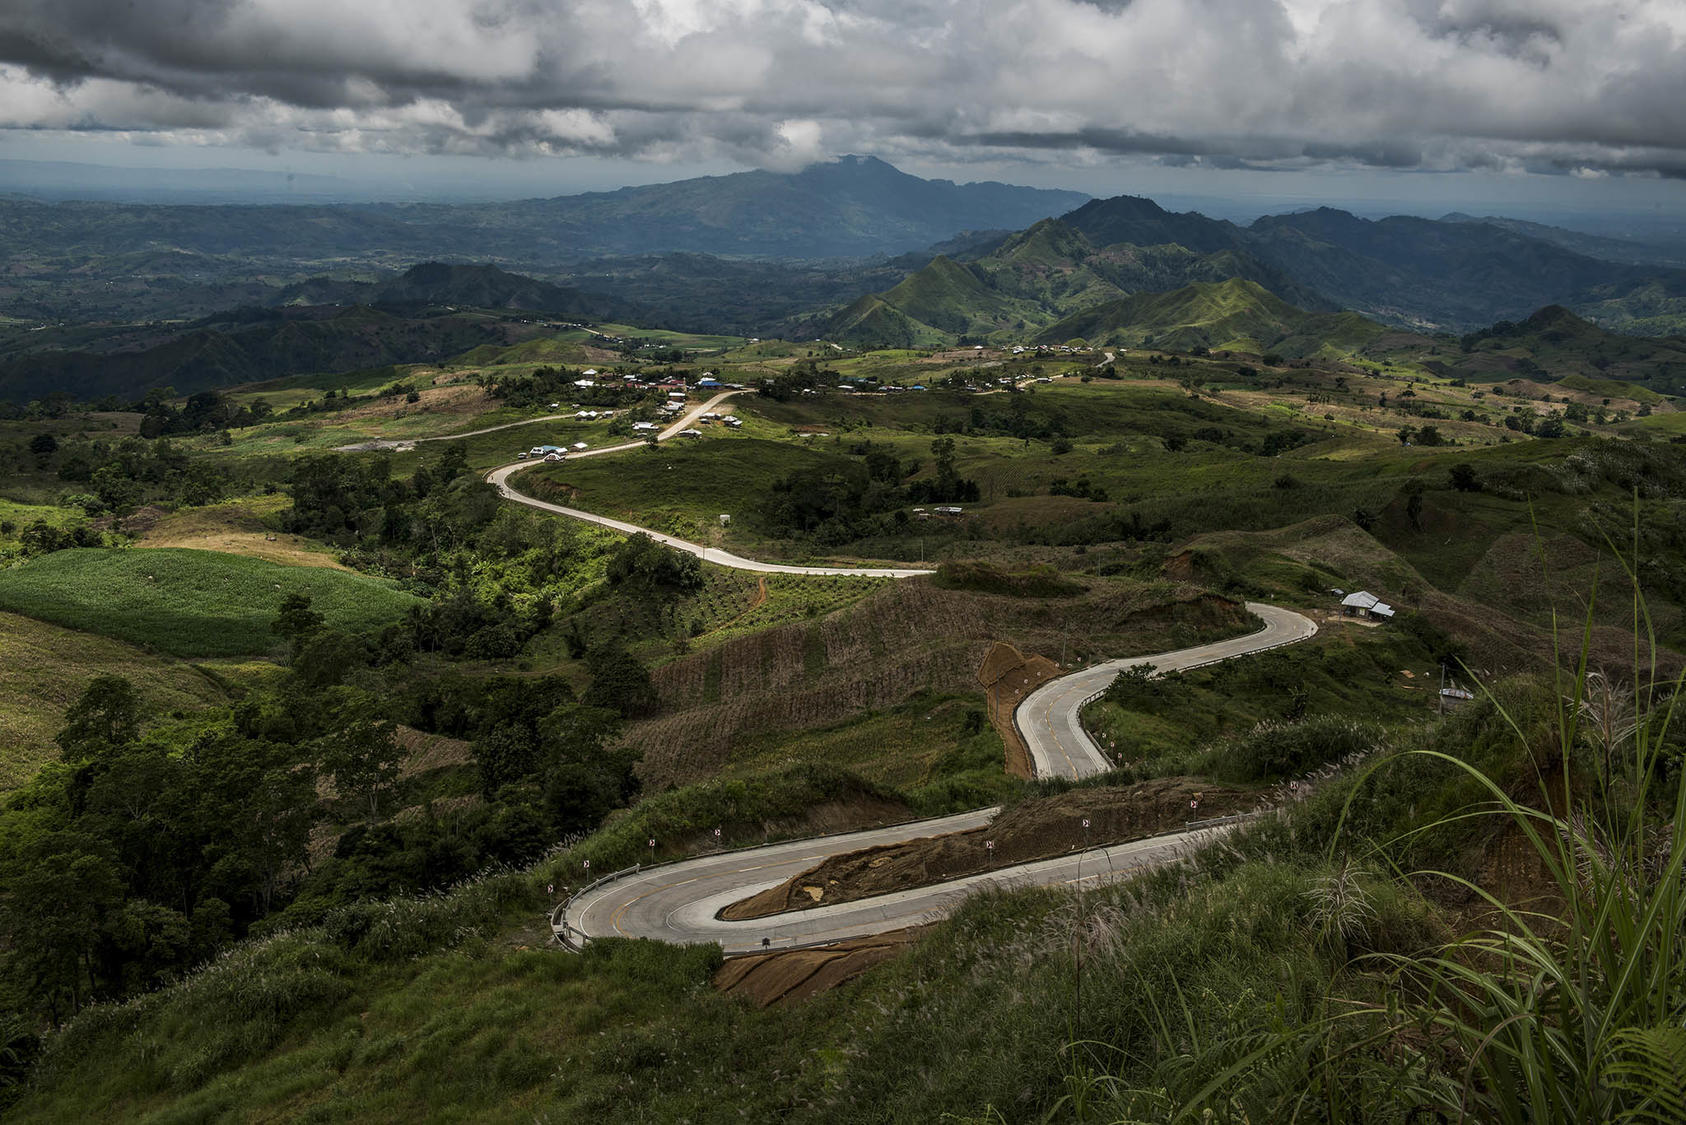 The boundary of North Cotabato, Maguindanao, and Bukidnon — the heartland of Mindanao, Philippines, Sept. 19, 2017. (Jes Aznar/The New York Times)